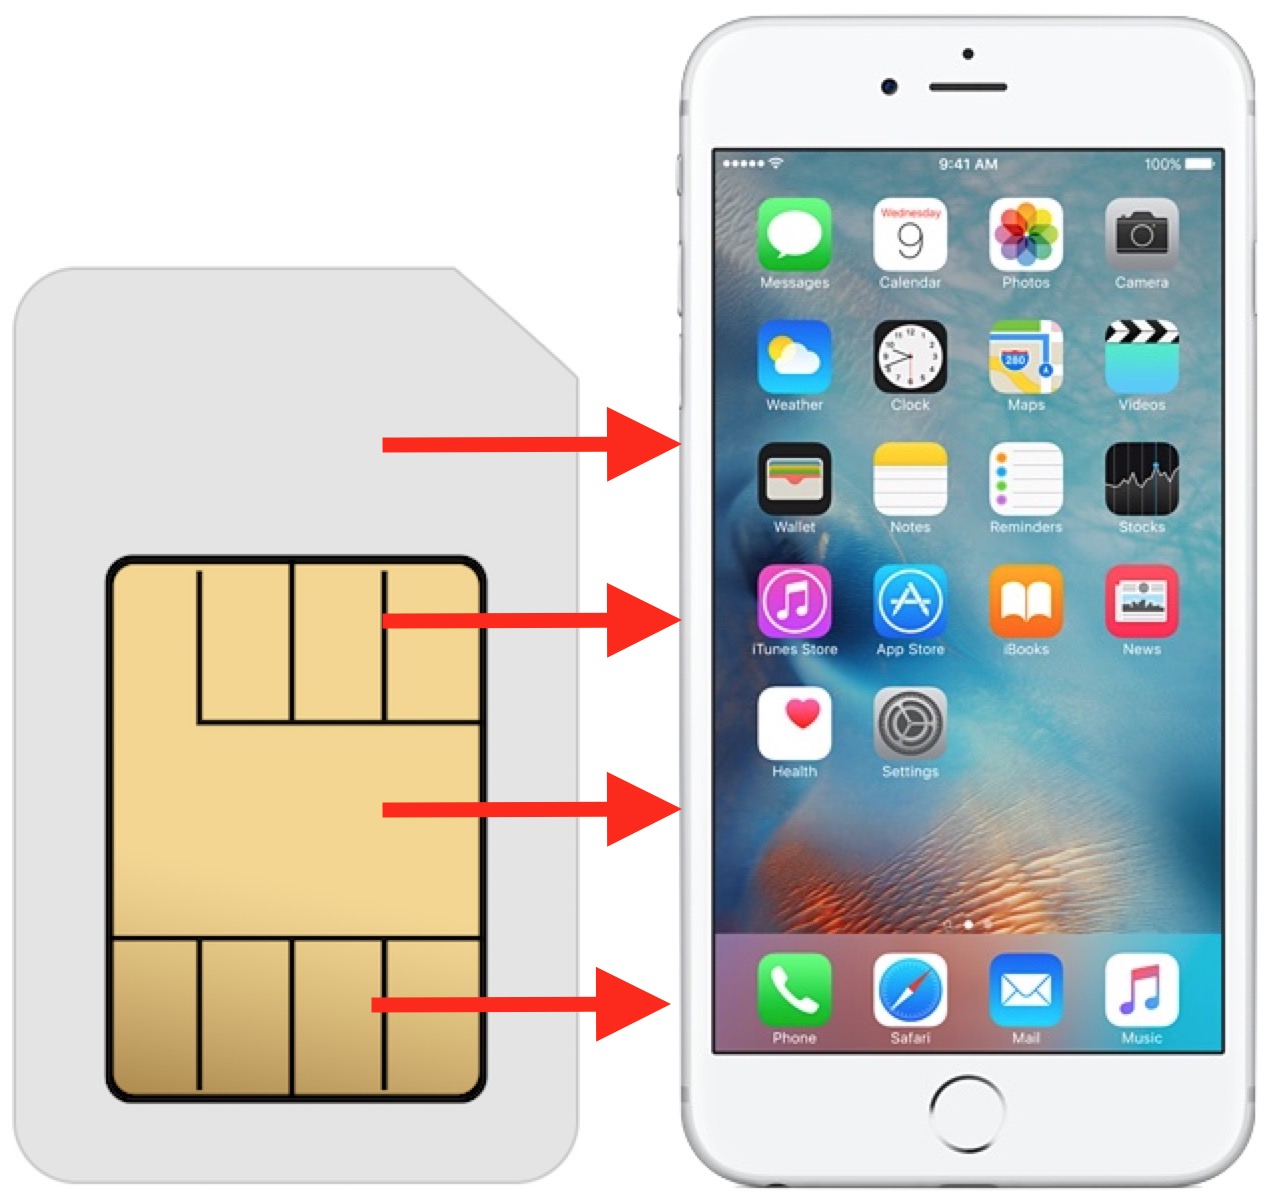 Saving Contacts To SIM Card: Essential Steps